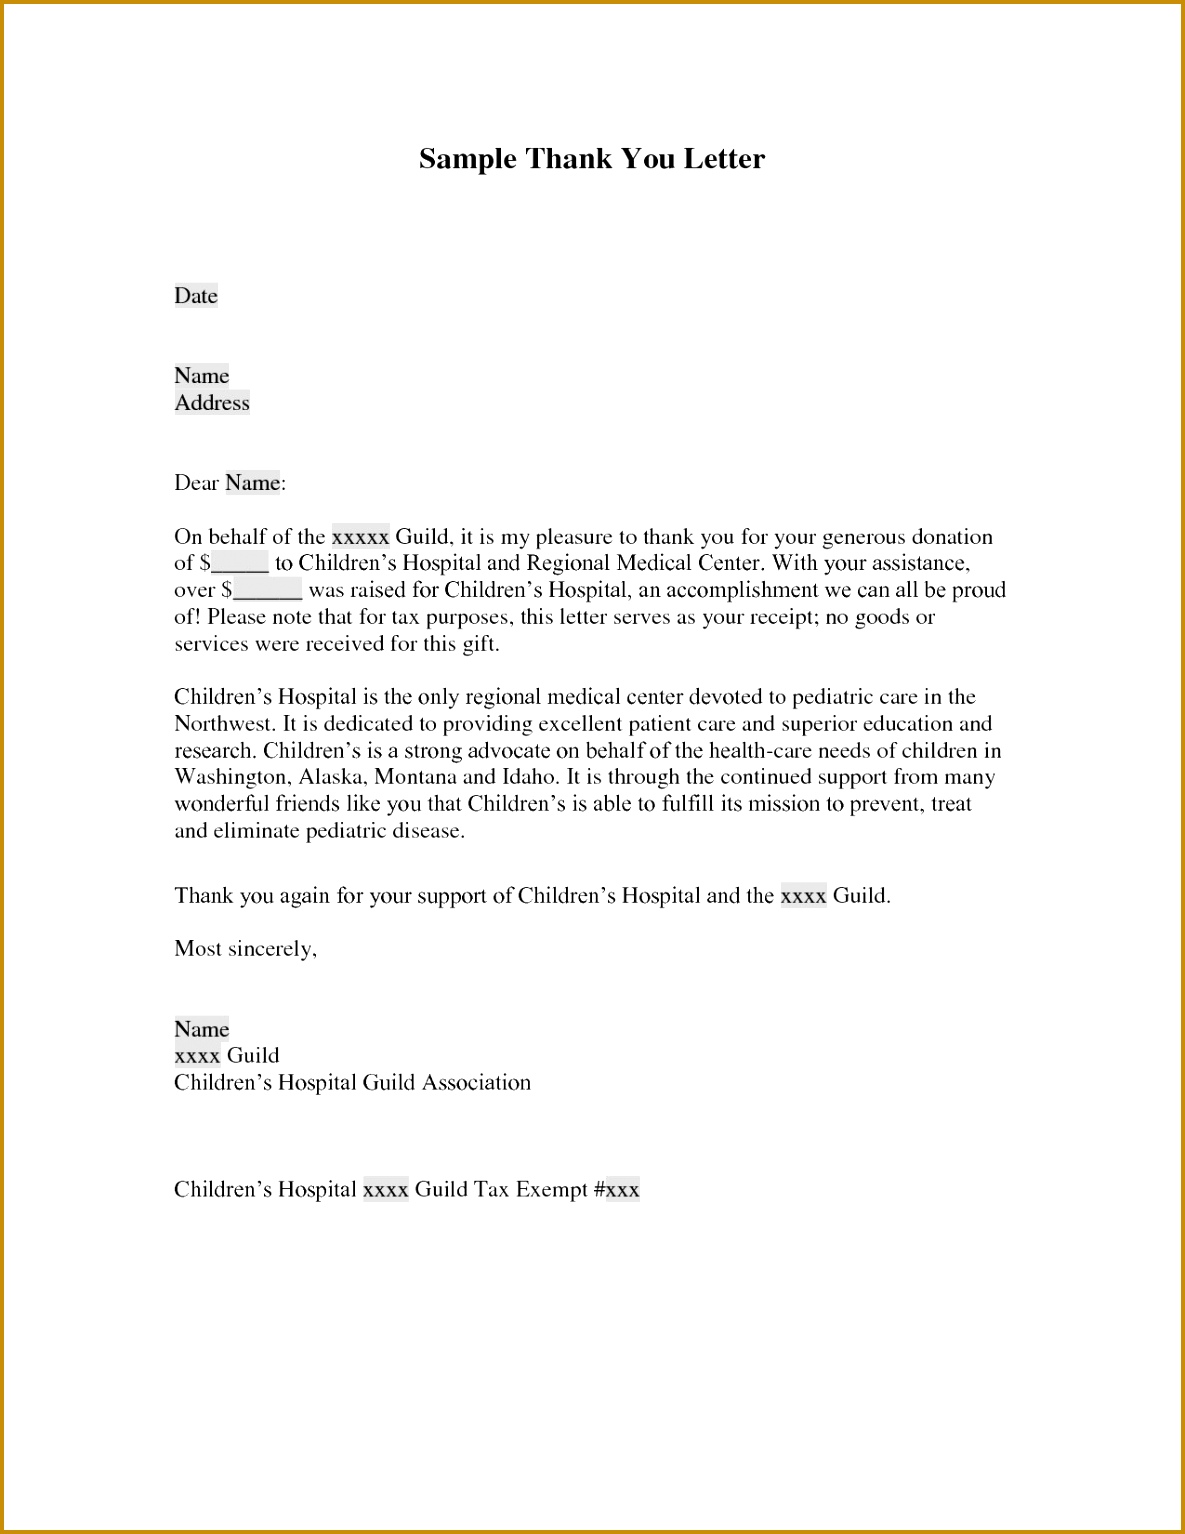 Thank You Letter New Sample Thank You Letter for Donation to School Pdf format 15341185